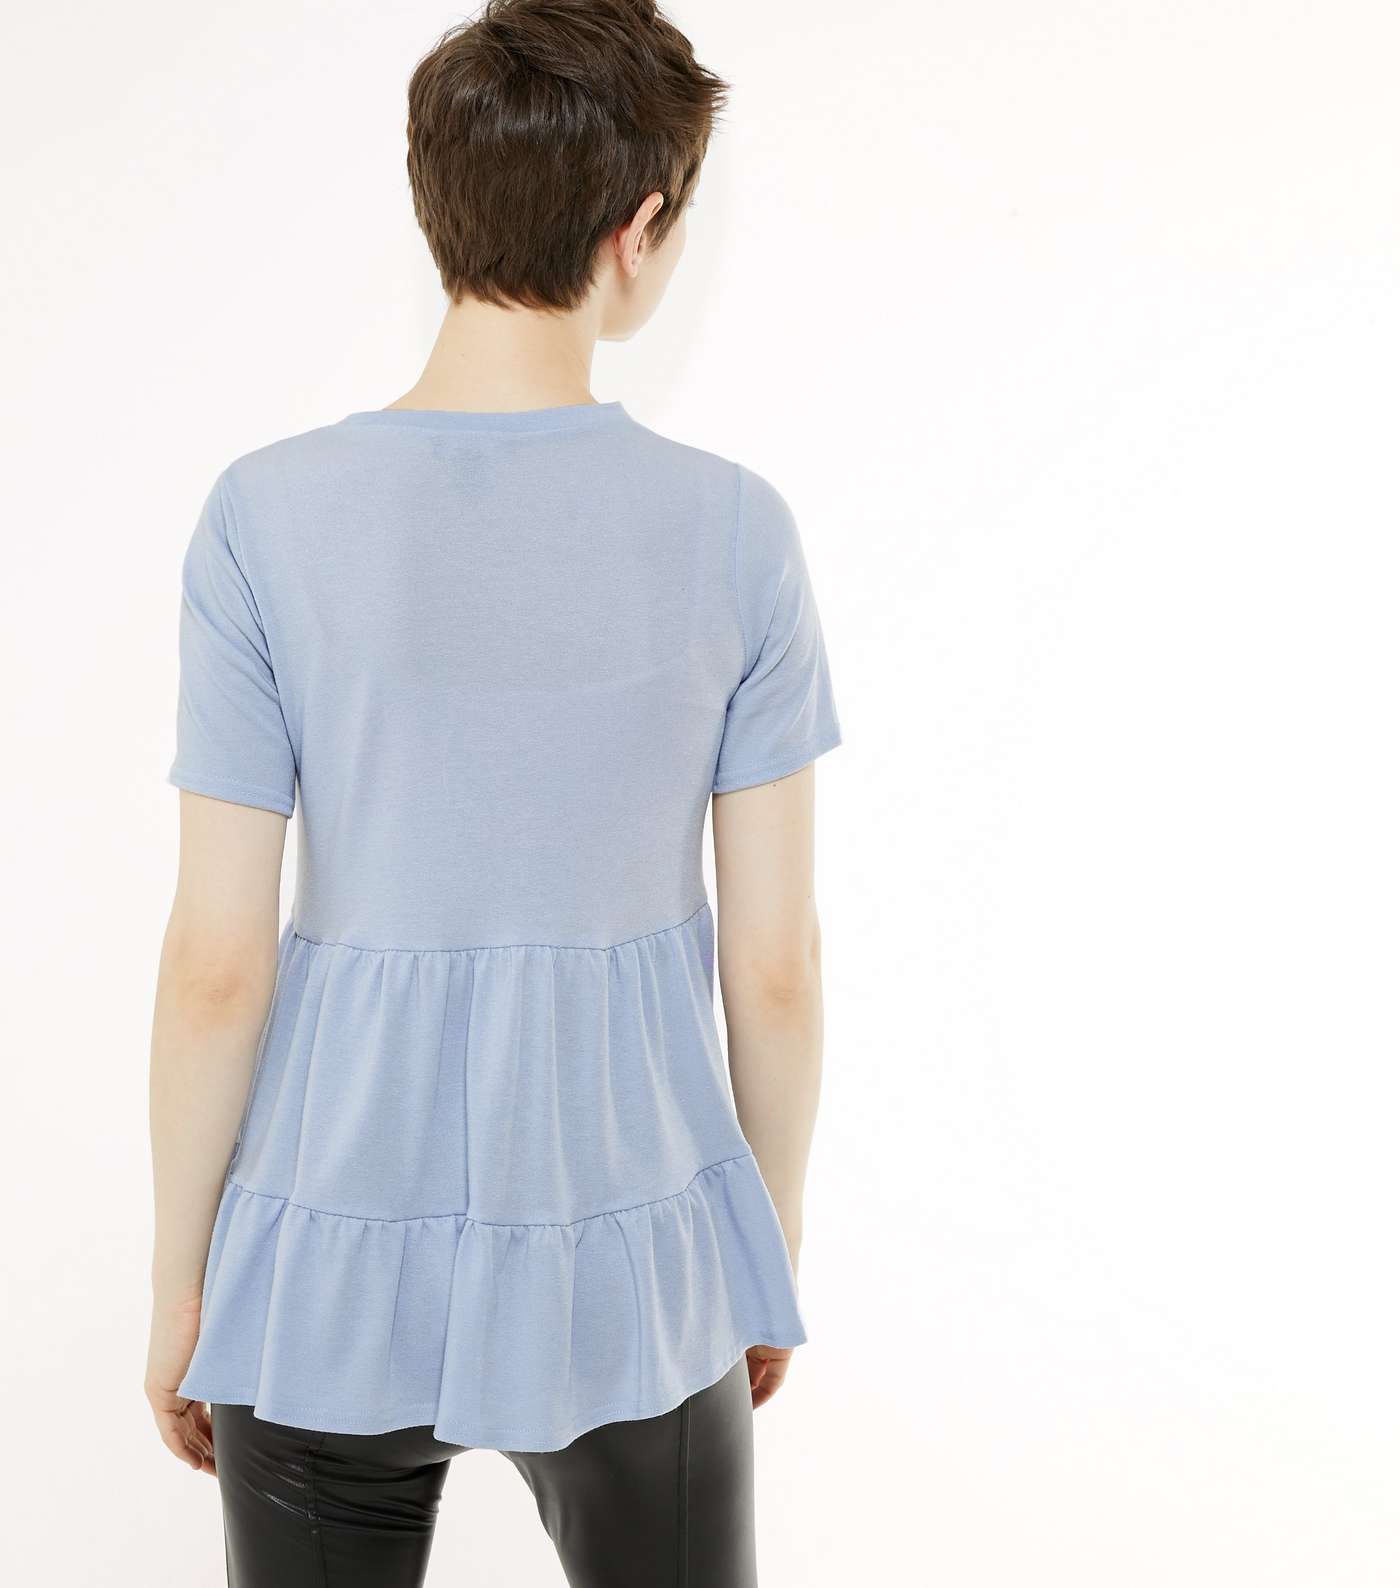 Pale Blue Tiered Peplum Jersey Top Image 3